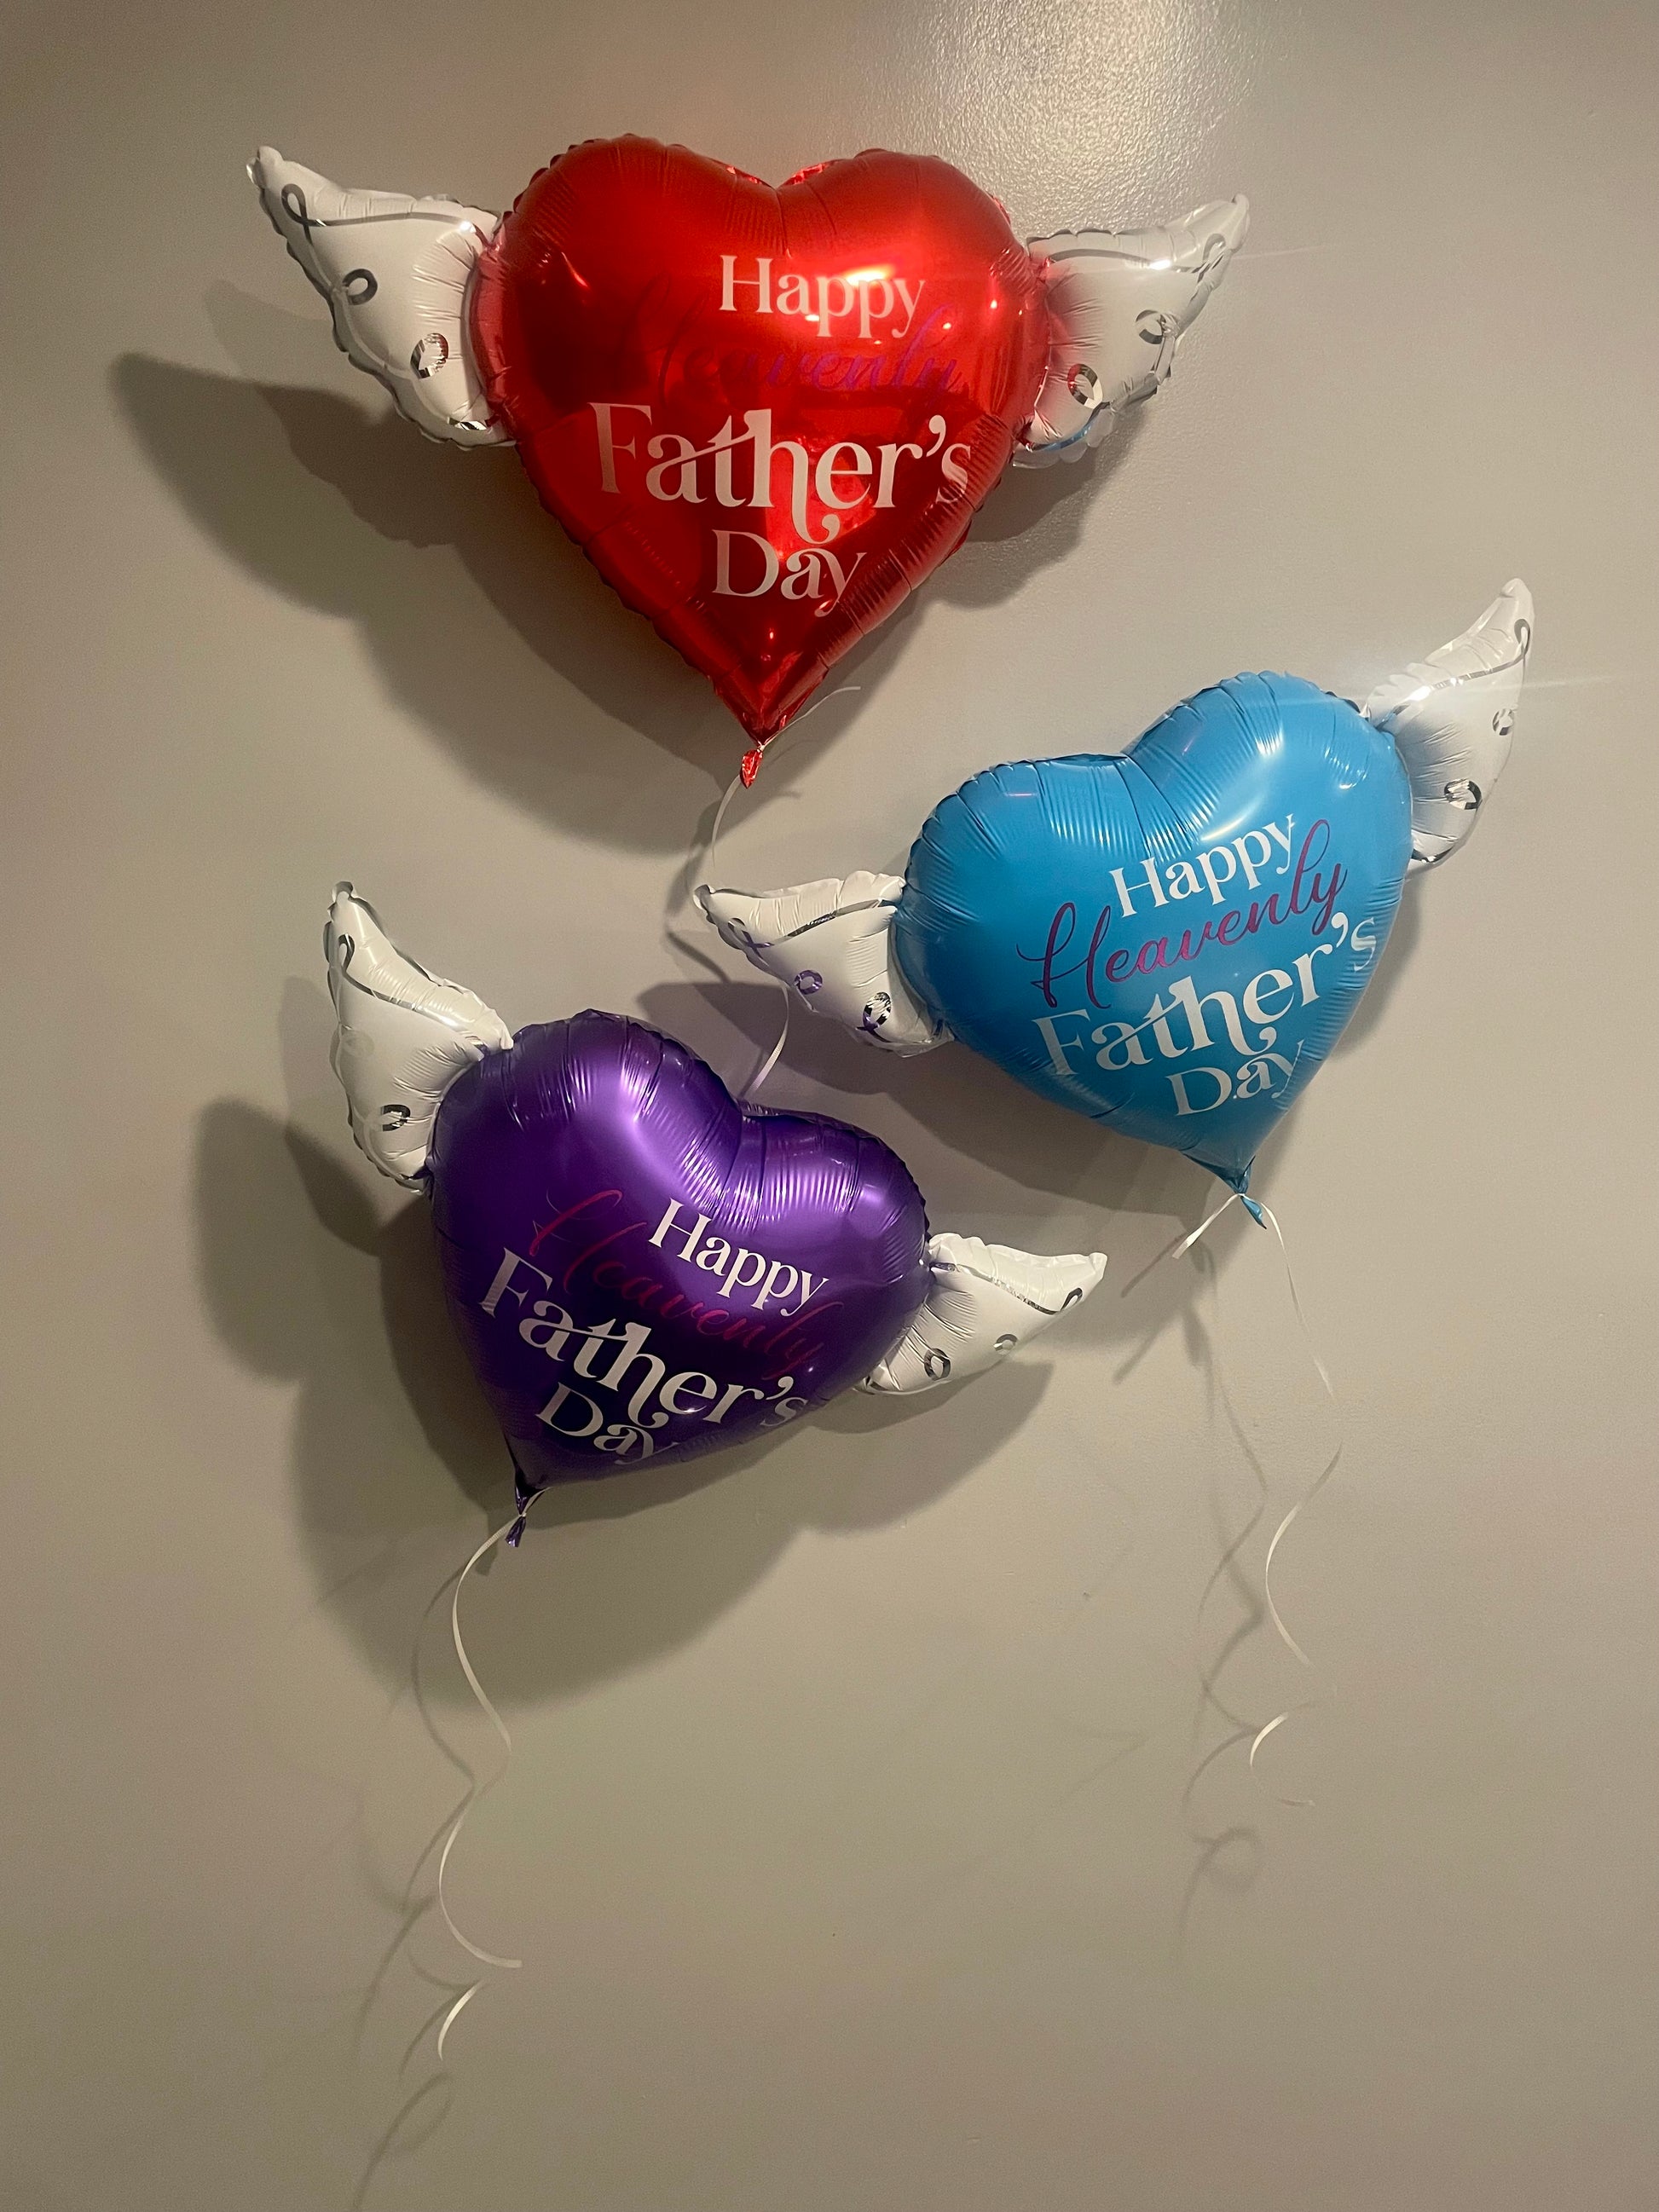 Happy Heavenly Father's Day Balloons Heart Shaped with angel wings (Blue, Red & Purple)